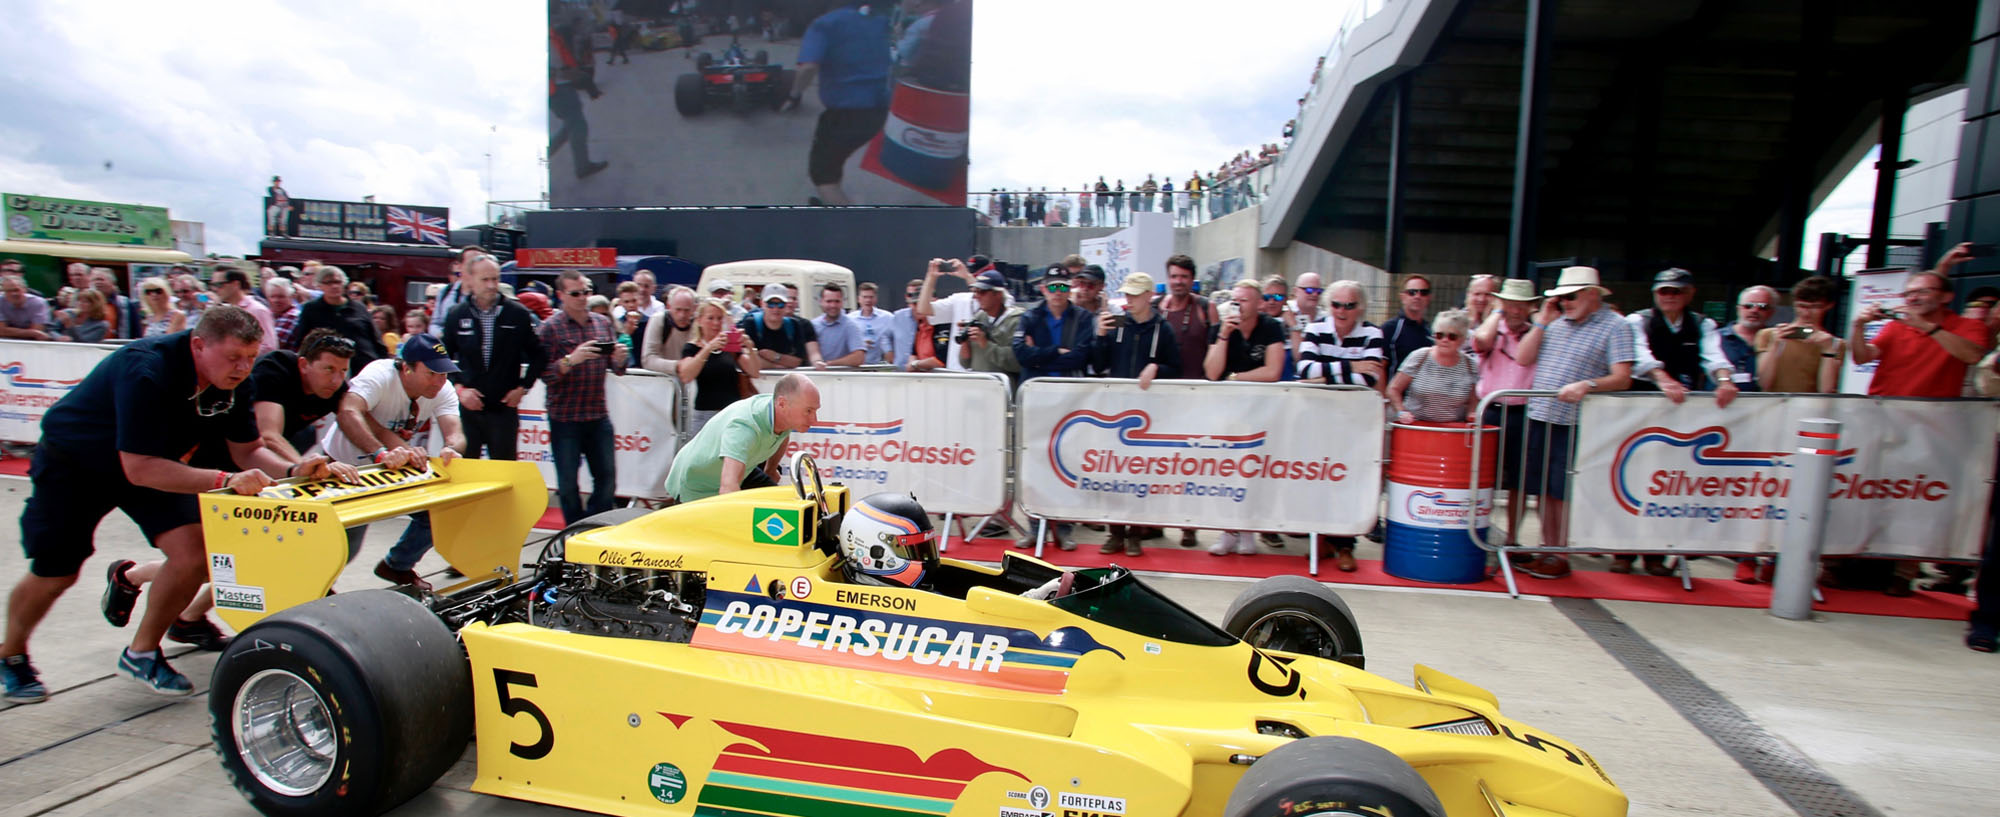 The Classic goes global with live streaming online Silverstone